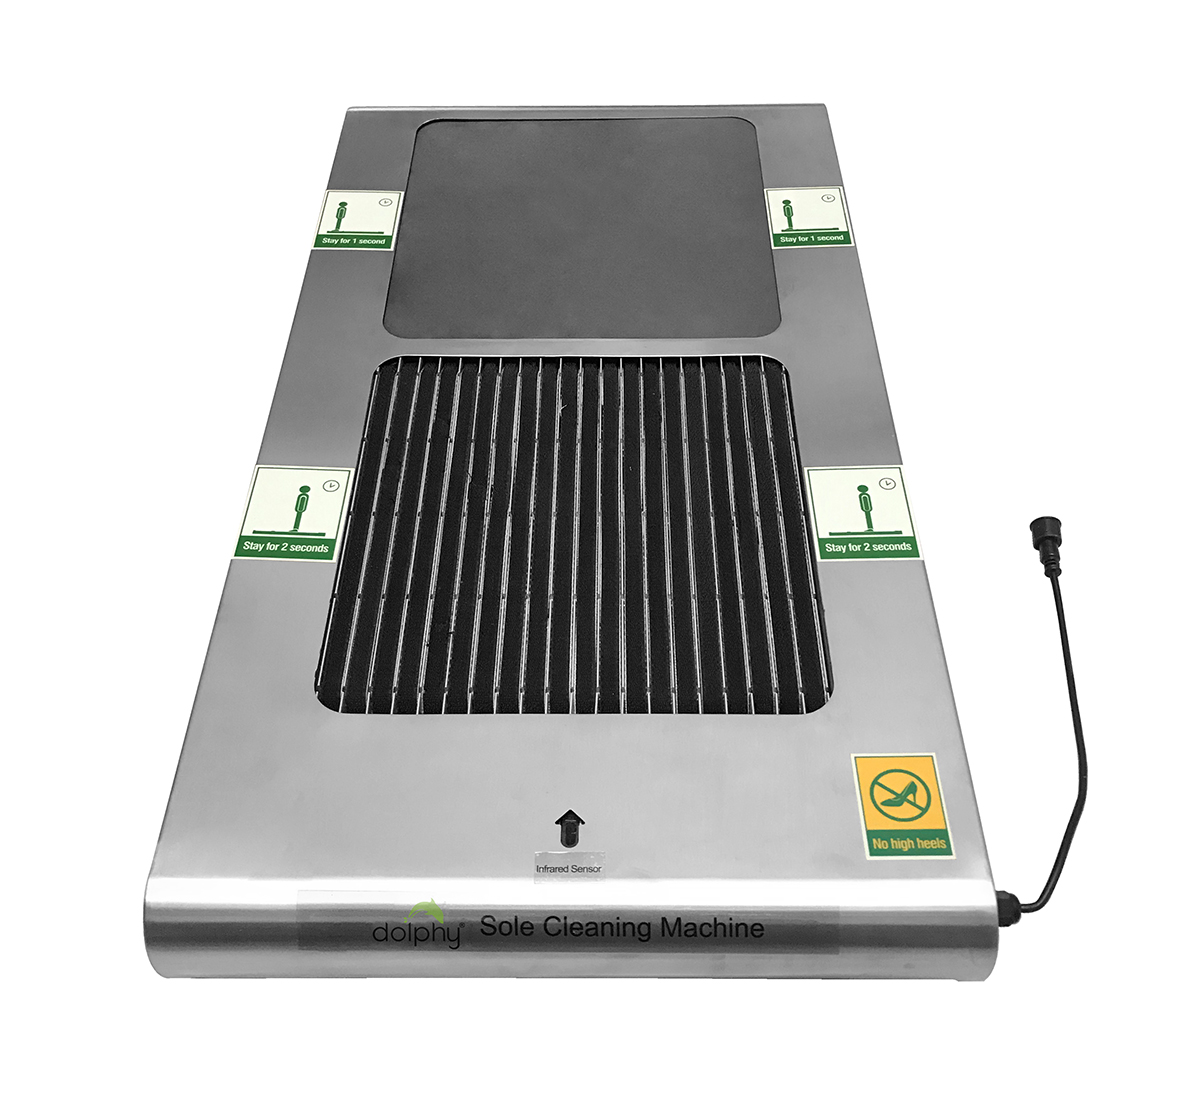 Silver sole cleaning machine with auto start